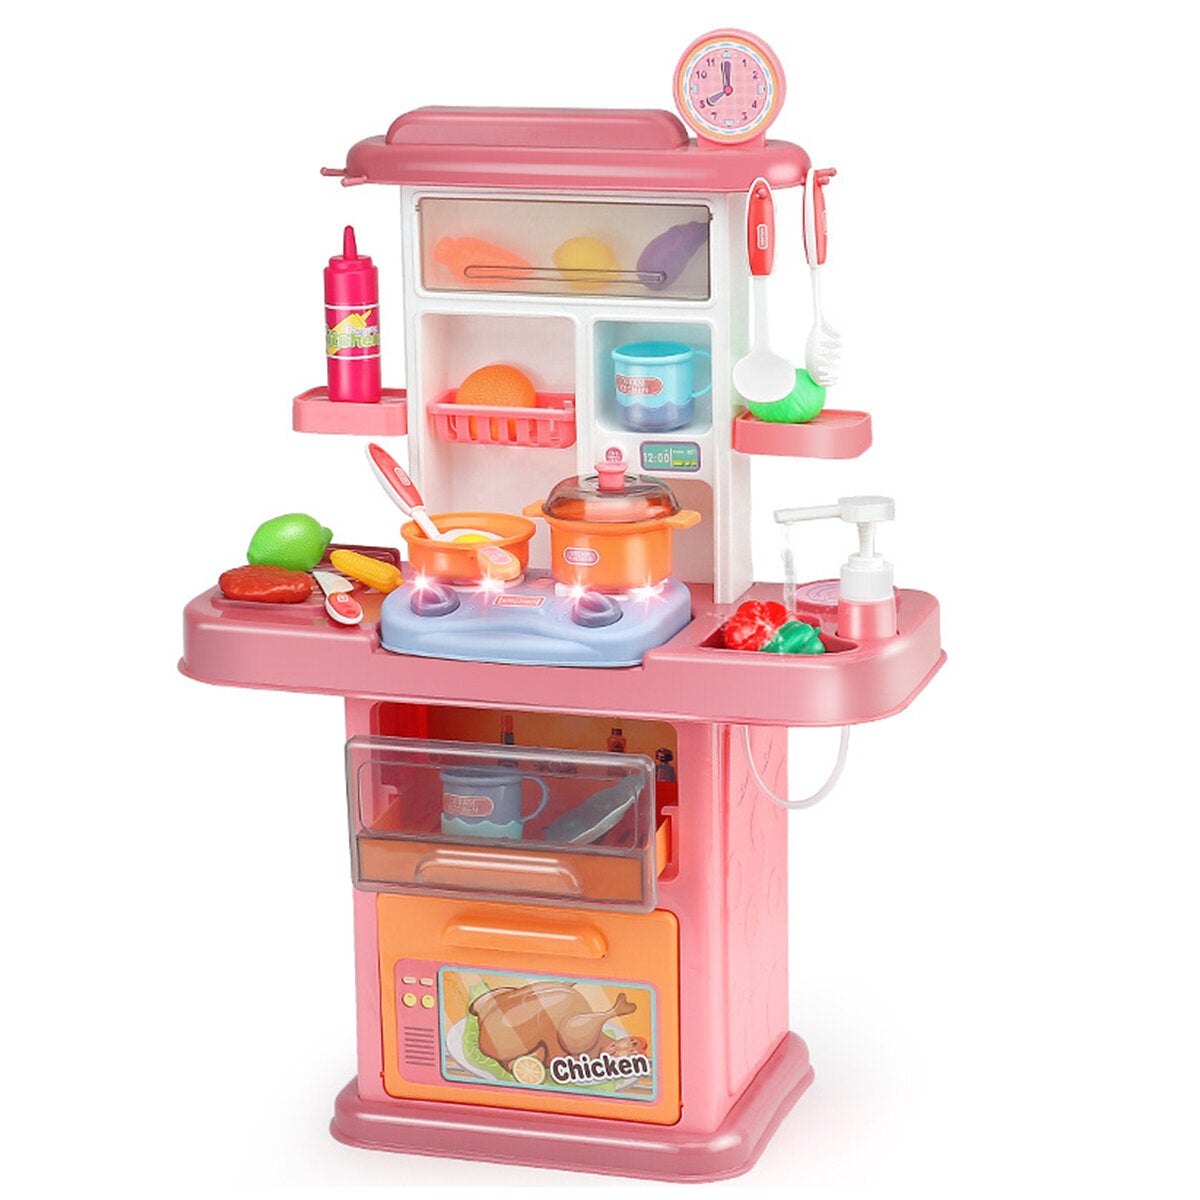 Dream Kitchen Role Play Cooking Children Tableware Toys Set with Sound Light Water Outlet Funtion